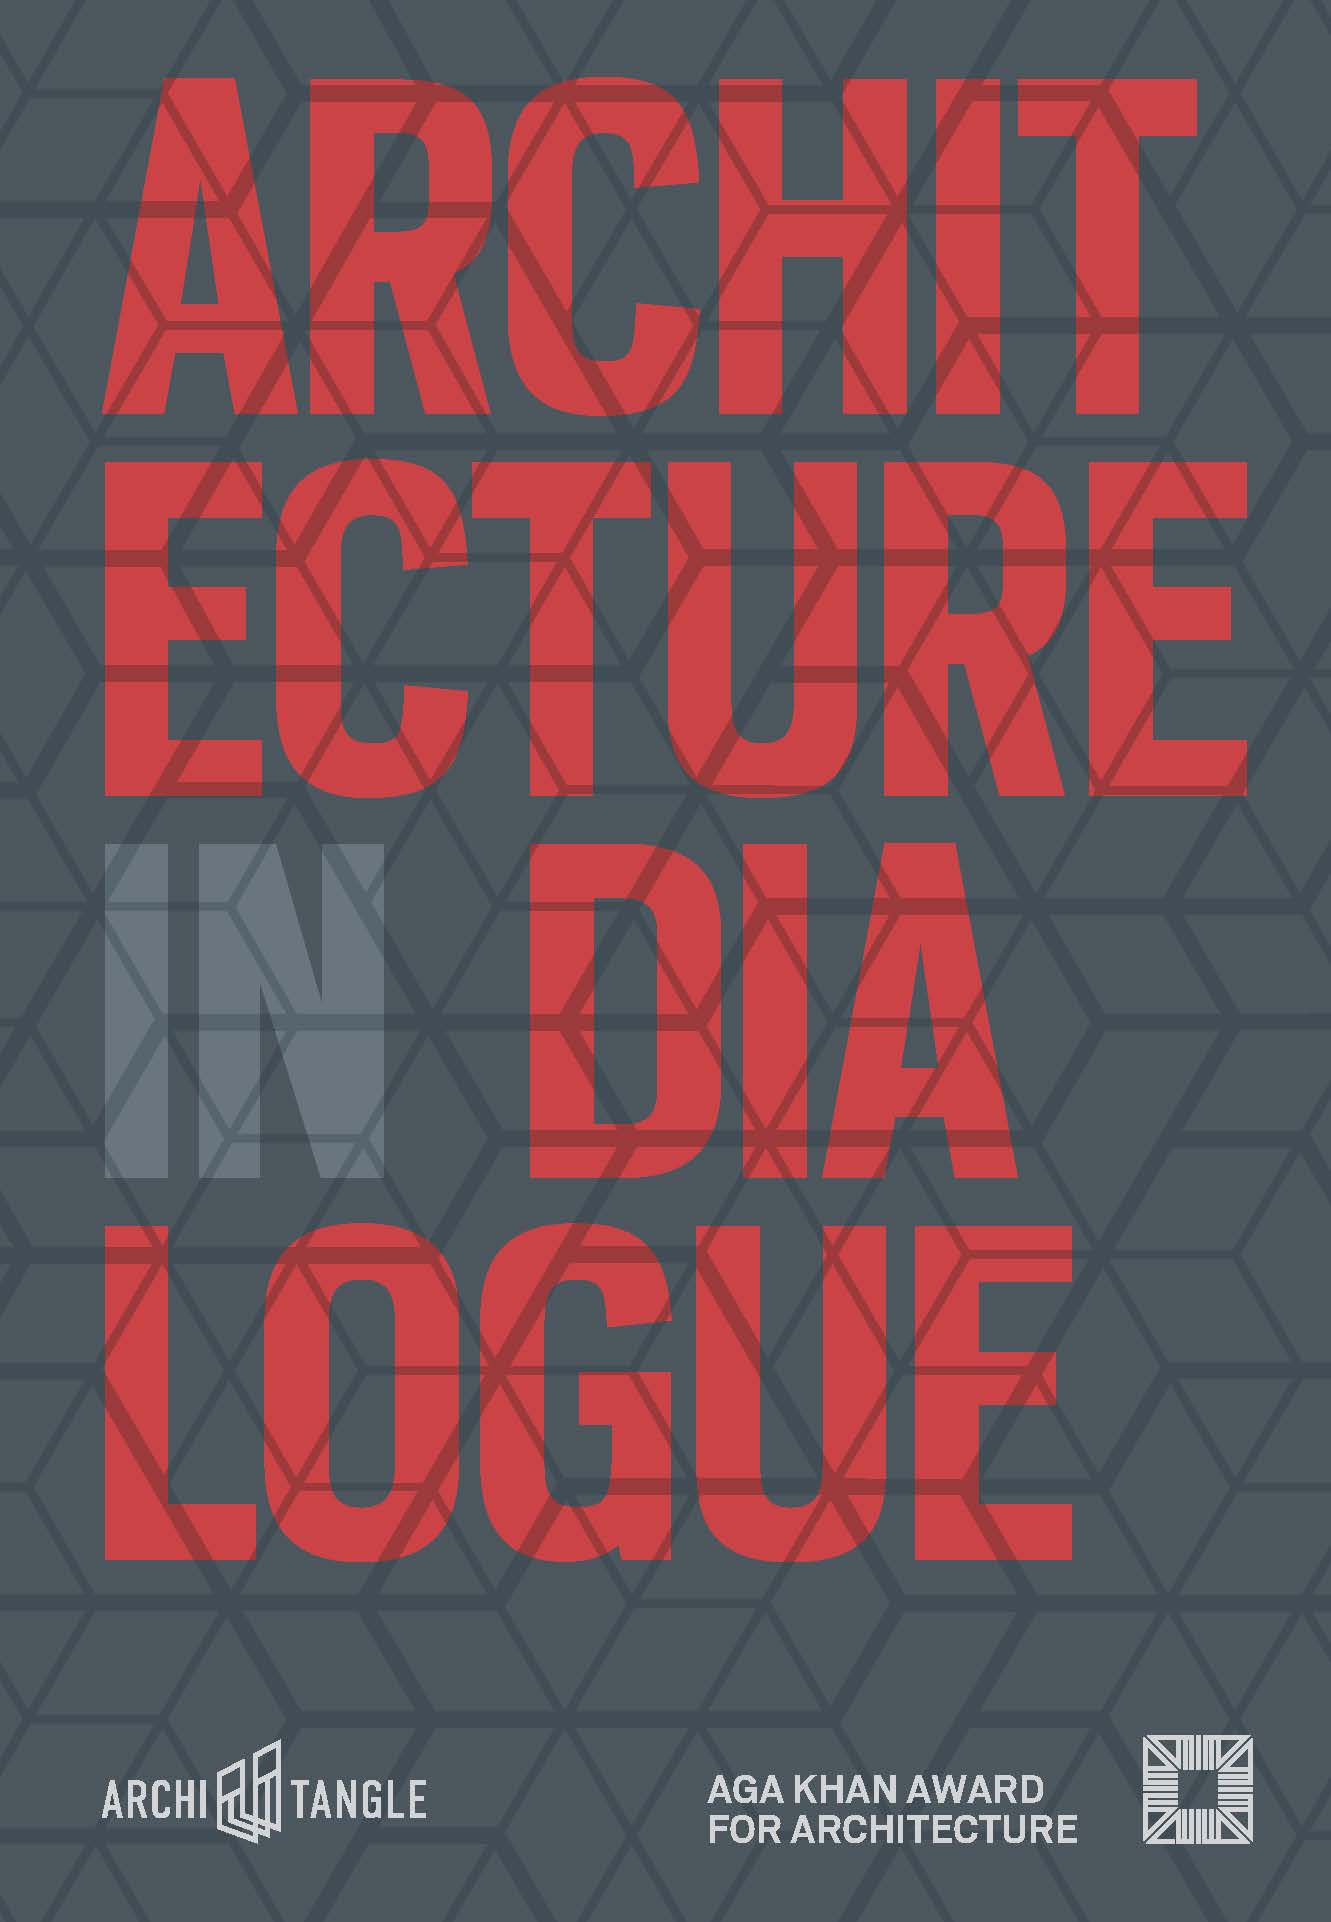 Foreword to Architecture in Dialogue